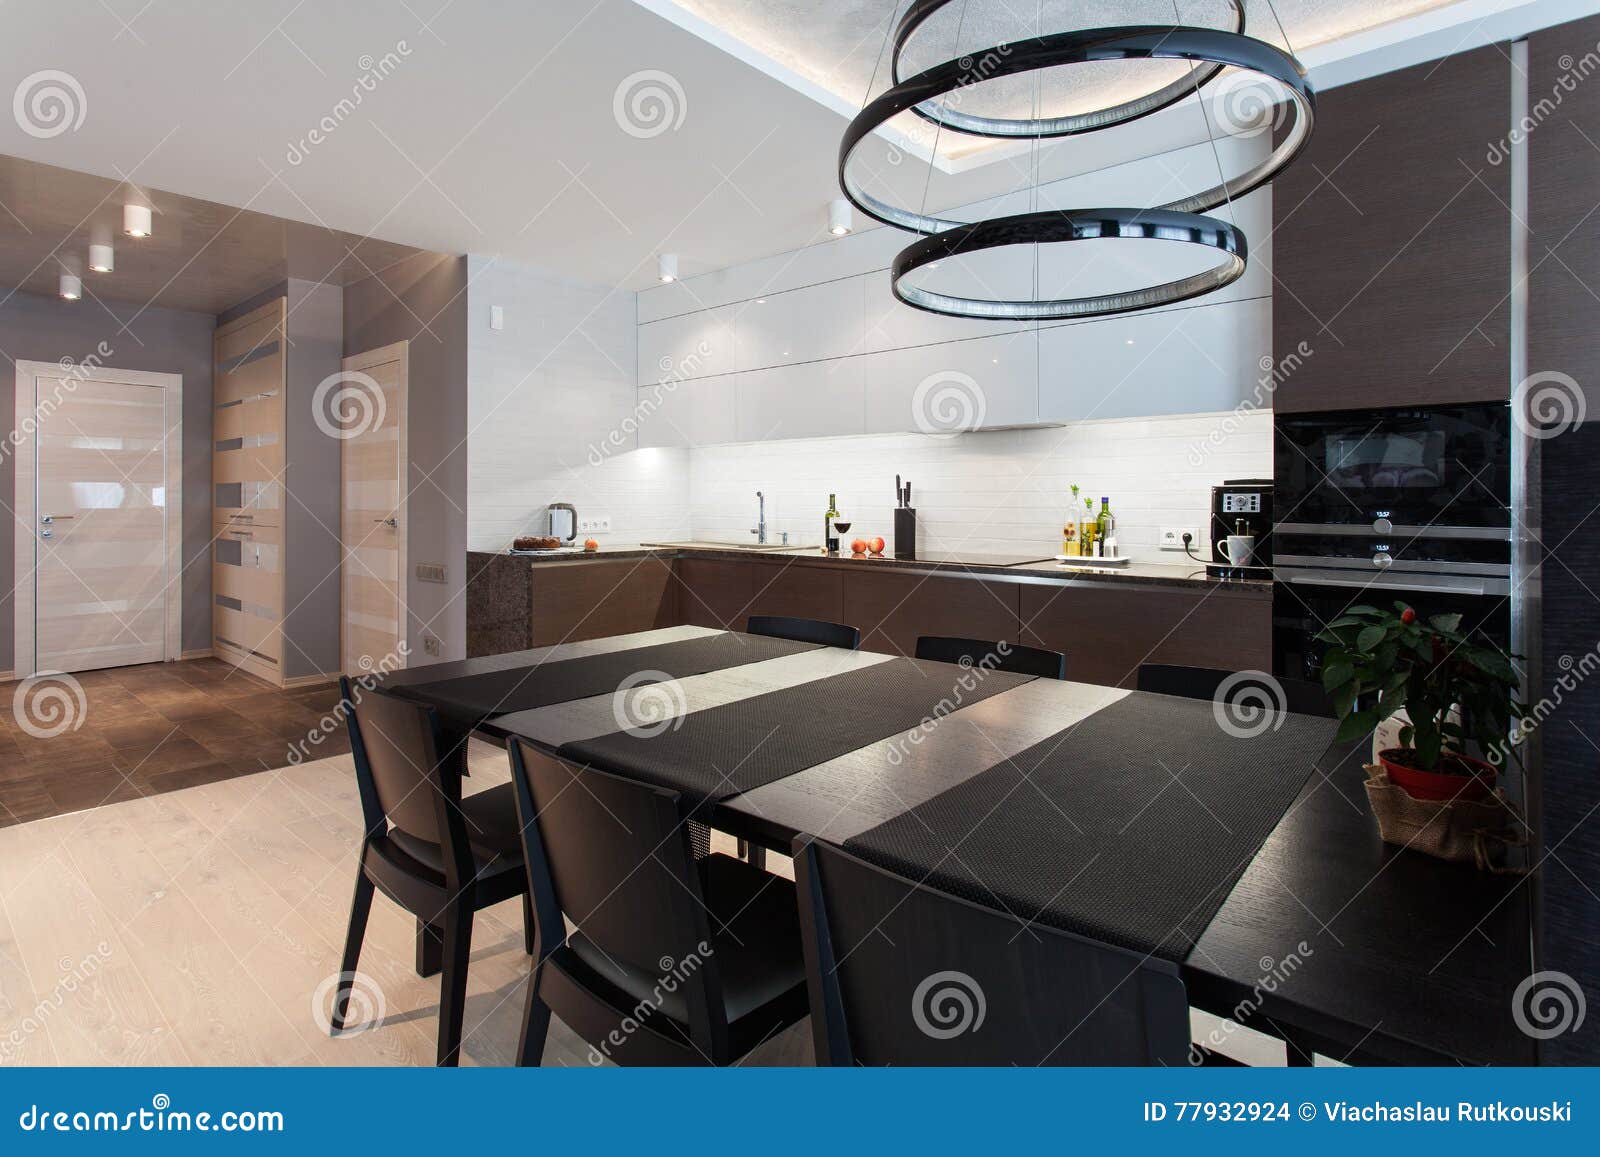 Interior Of A High Tech Kitchen Stock Photo Image Of Chandelier